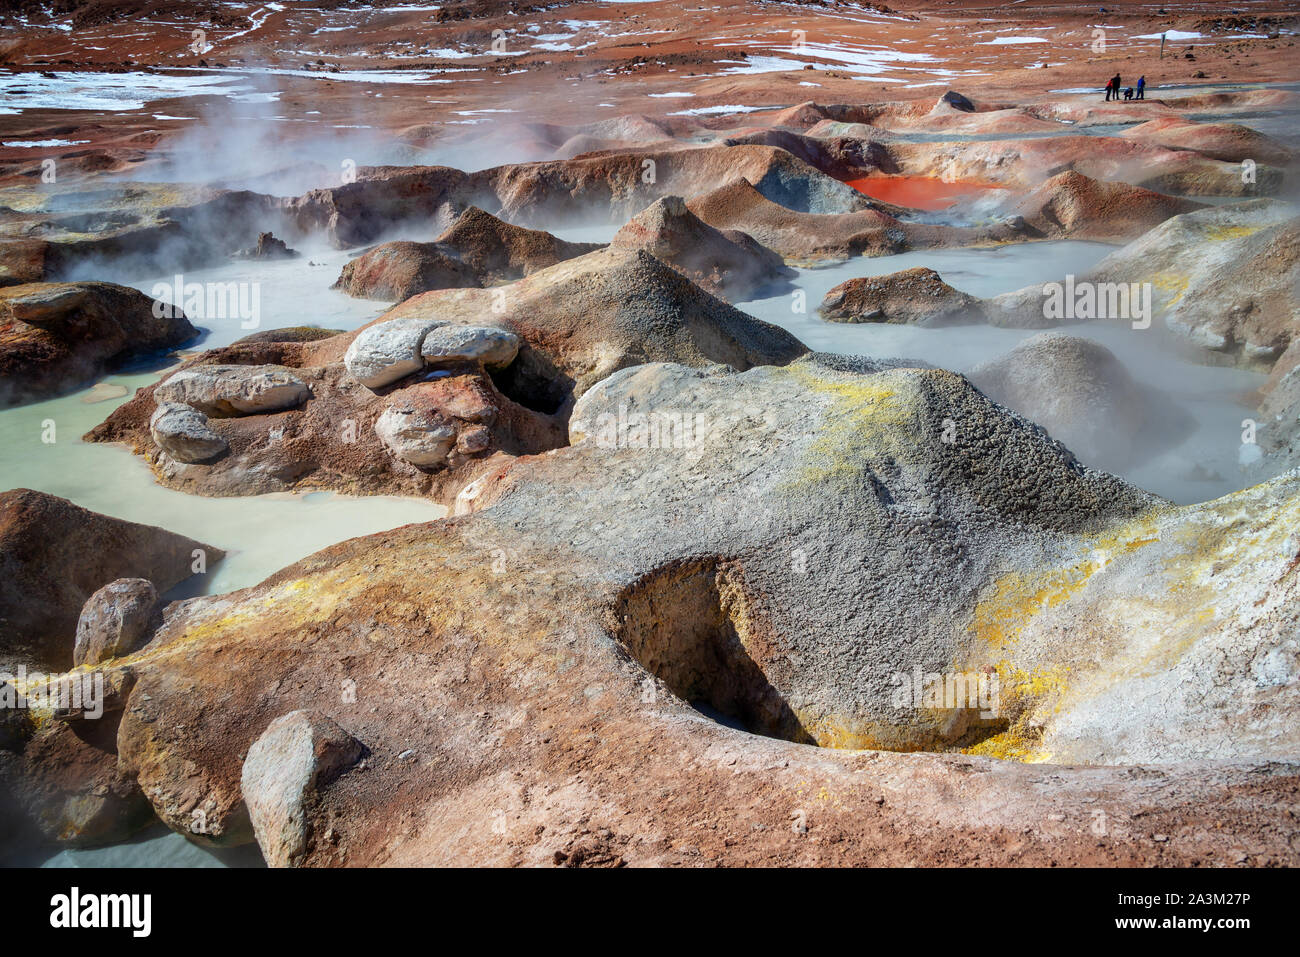 Sol de Manana, geysers and geothermal area in Sur Lipez province, Potosi, Bolivia Stock Photo